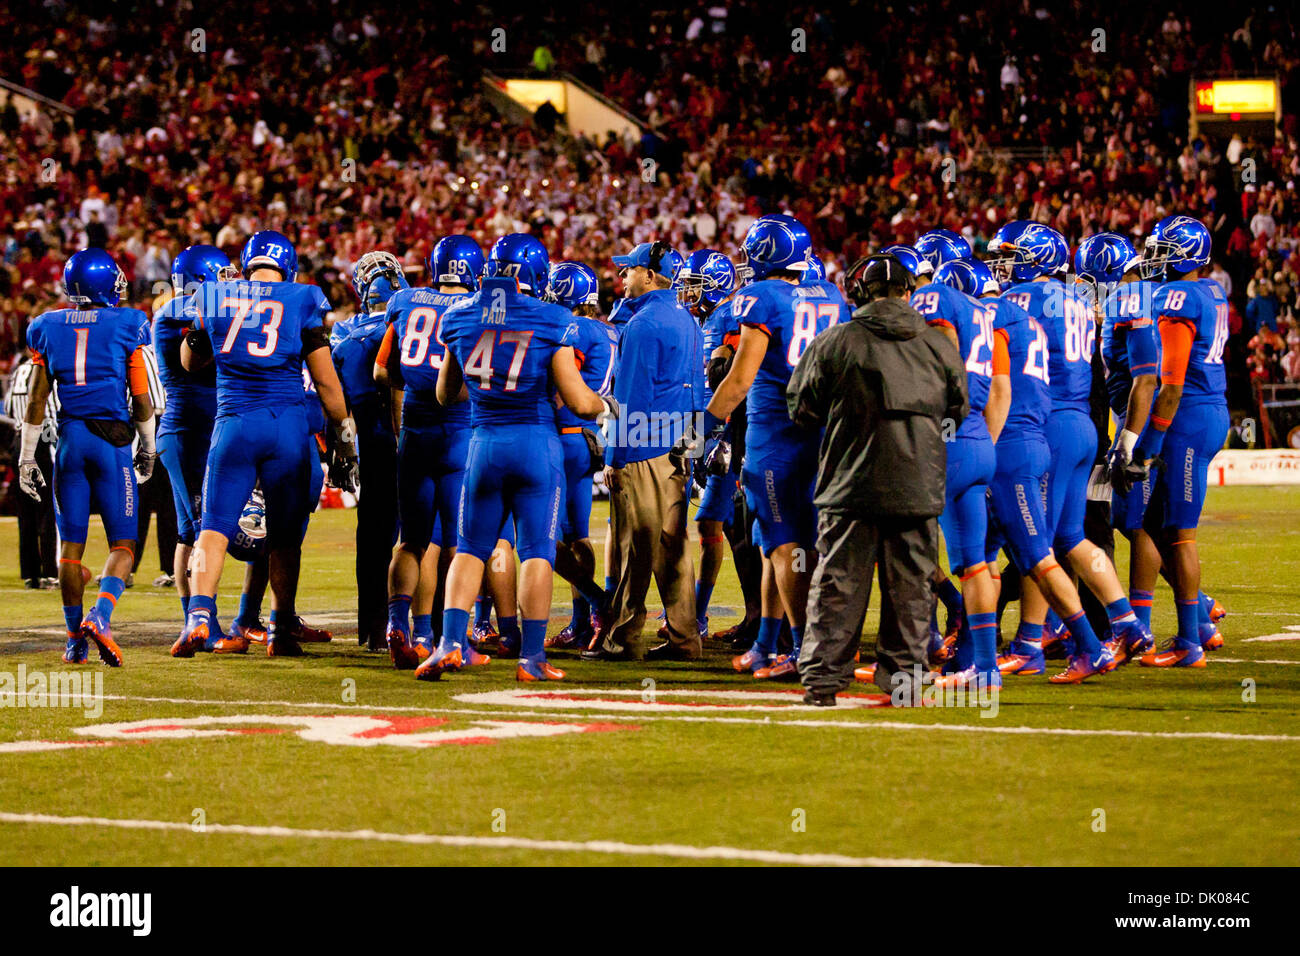 Dec. 22, 2010 - Las Vegas, Nevada, U.S - Boise State gathers their thoughts during a time out during first half action of the 2010 MAACO Bowl Las Vegas at Sam Boyd Stadium in Las Vegas, Nevada.  The Boise State Broncos lead the Utah Utes 16 to 3 after the first half of play. (Credit Image: © Matt Gdowski/Southcreek Global/ZUMAPRESS.com) Stock Photo